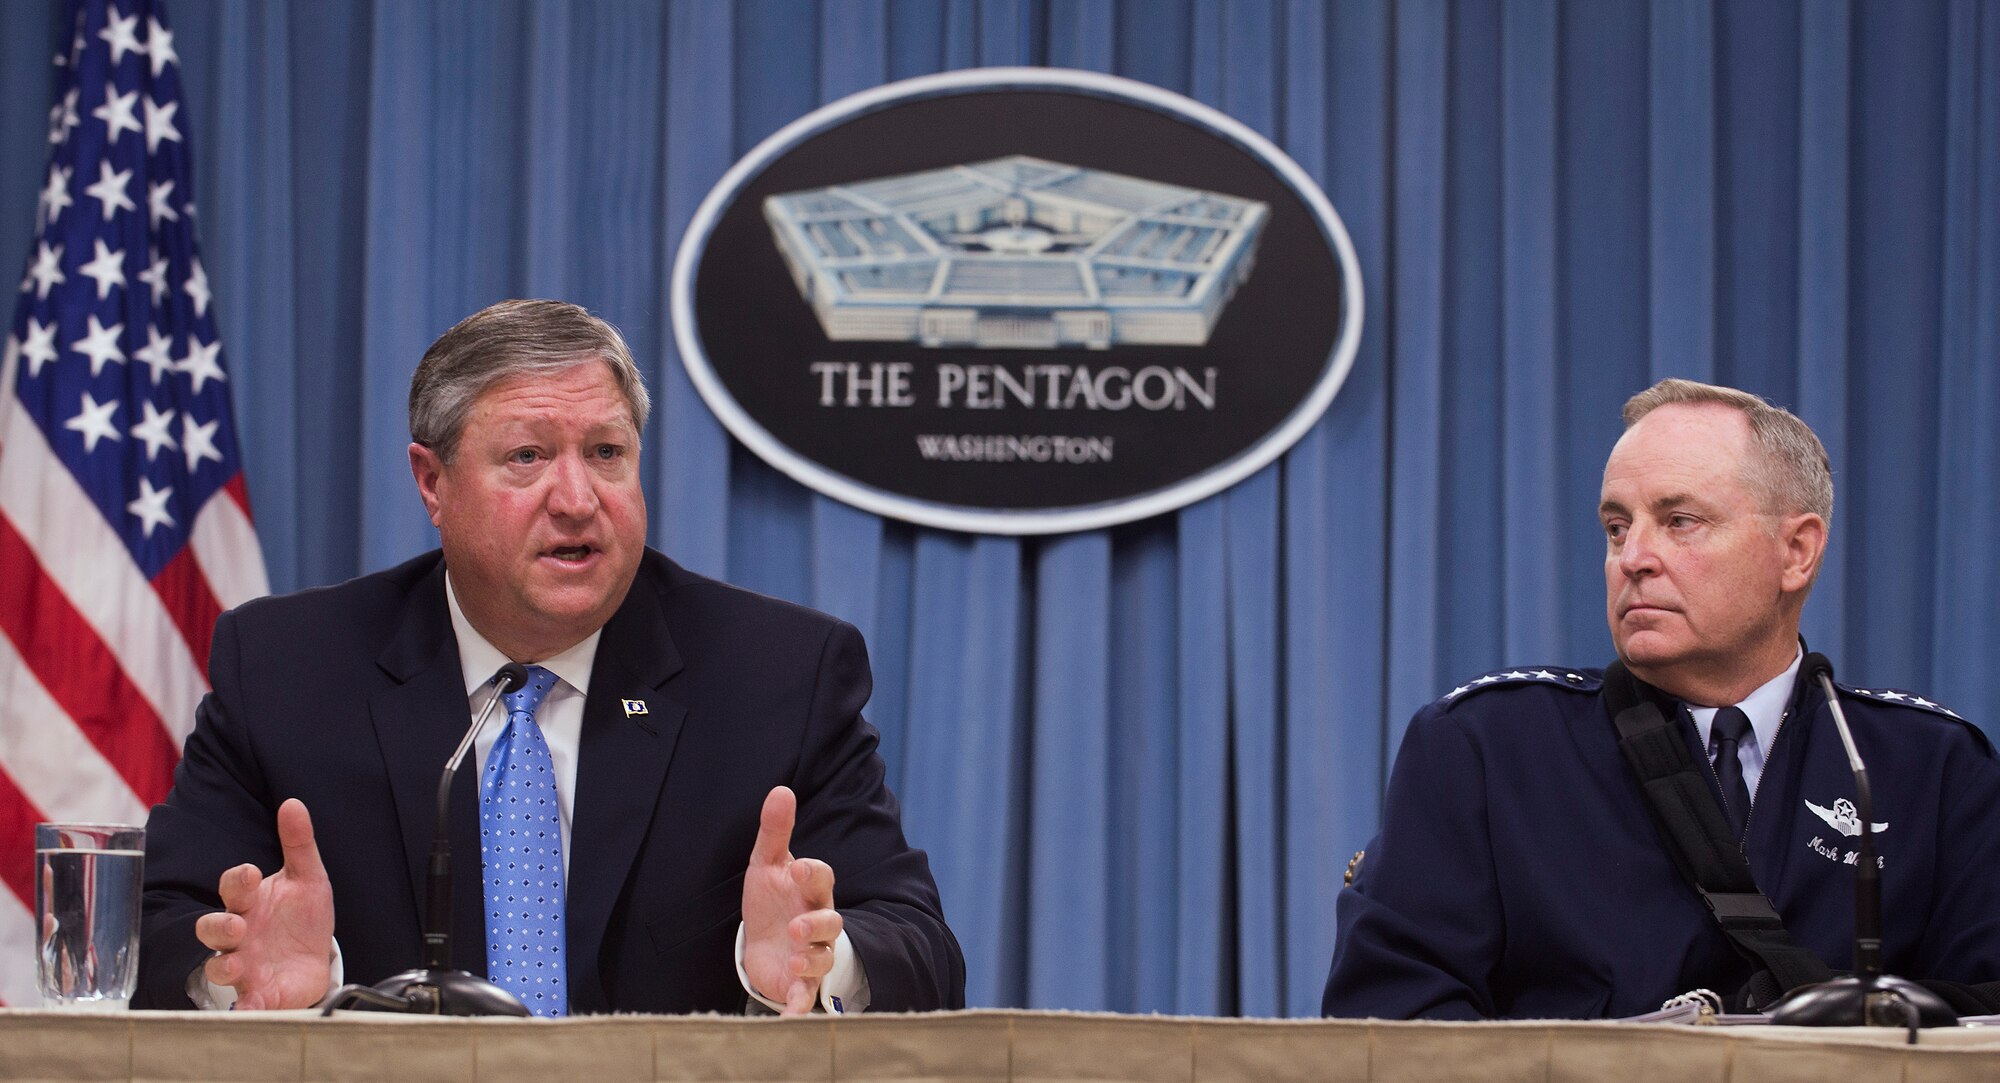 Secretary of the Air Force Michael Donley answers a reporter's question as Air Force Chief of Staff Gen. Mark A. Welsh III looks on during a press briefing at the Pentagon, Jan. 11, 2013, Washington, D.C. Donley and Welsh talked about the state of the Air Force and the importance of balancing the force structure, today’s readiness and modernization for the future. (U.S. Air Force photo/Jim Varhegyi)